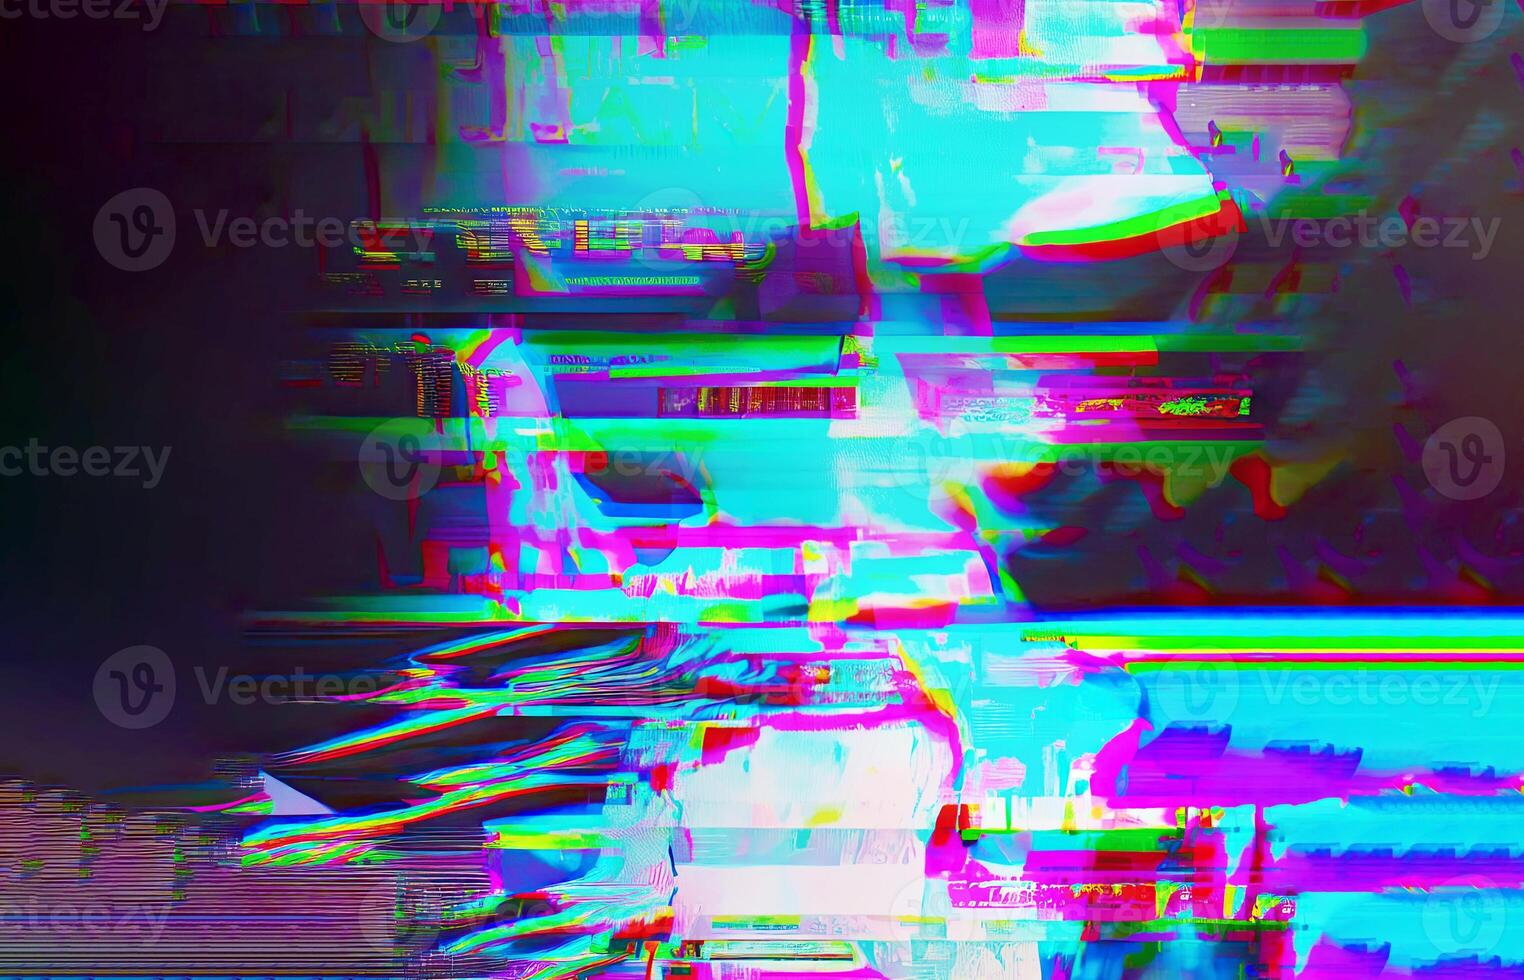 Digital Broken Screen Glitch Effect in Pixelated Style with Distorted Lines and Patterns, Perfect for Creating Futuristic and Cyberpunk Designs for Various Projects photo